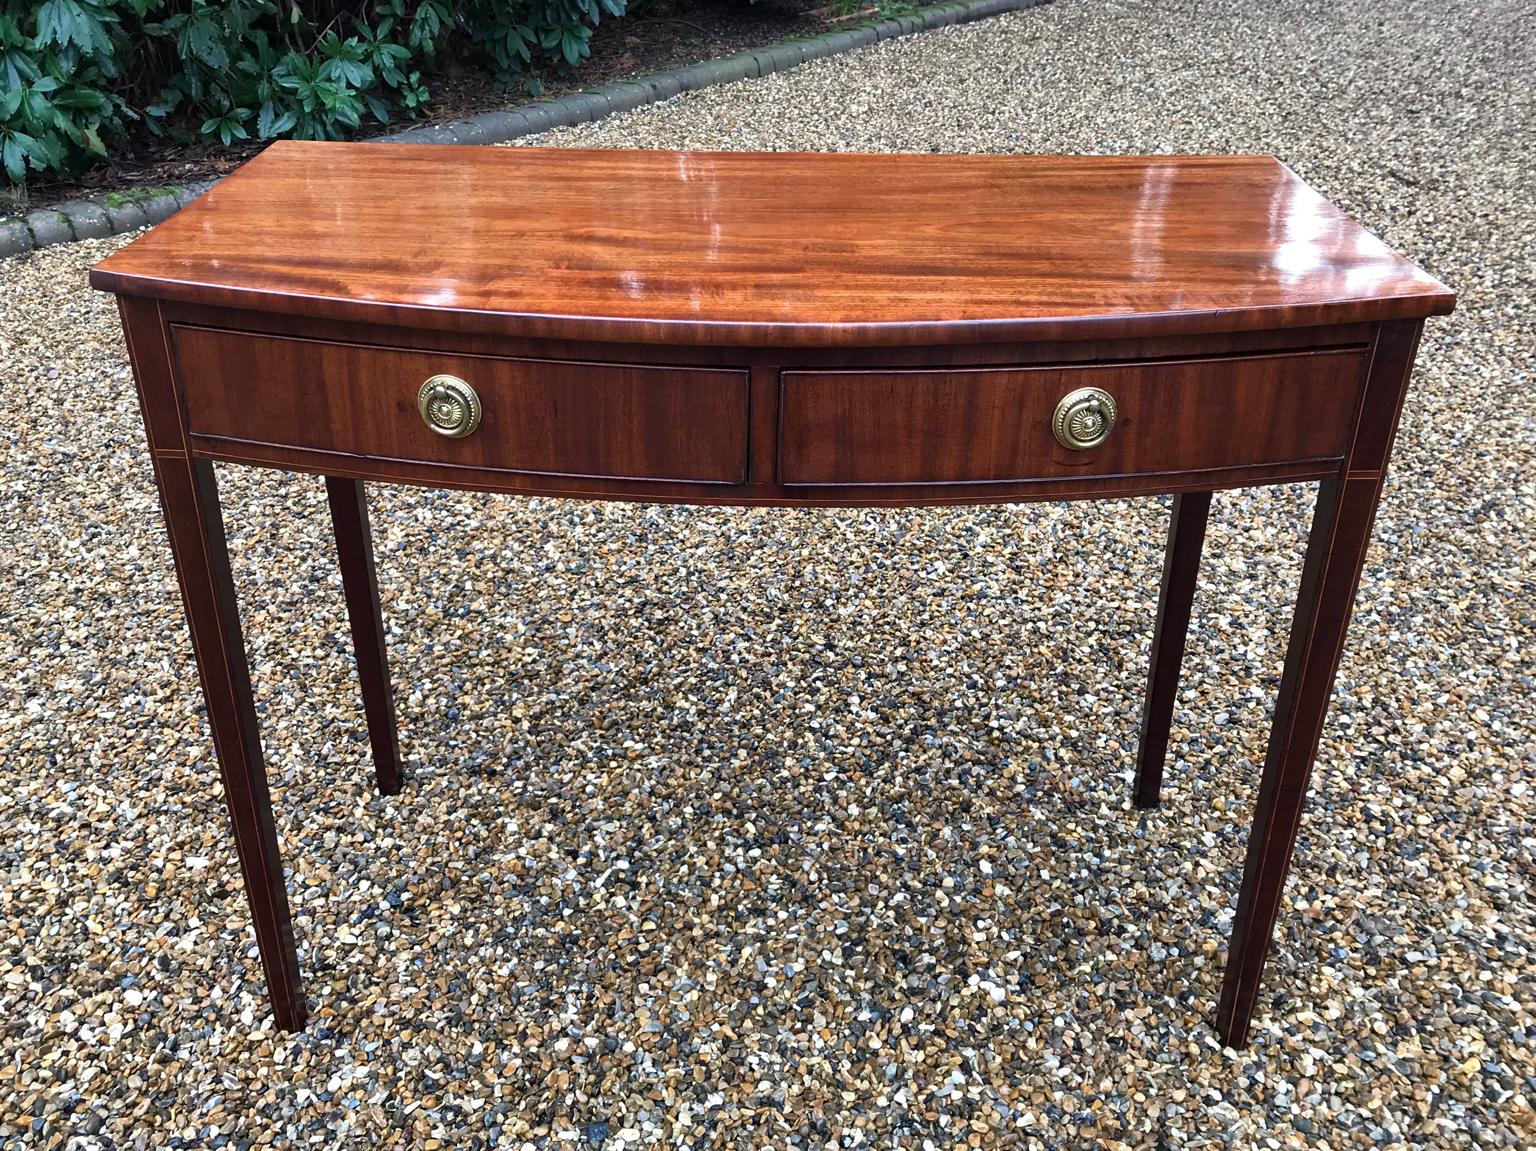 19th Century Regency Mahogany Bow Fronted Side Table im Zustand „Hervorragend“ in Richmond, London, Surrey